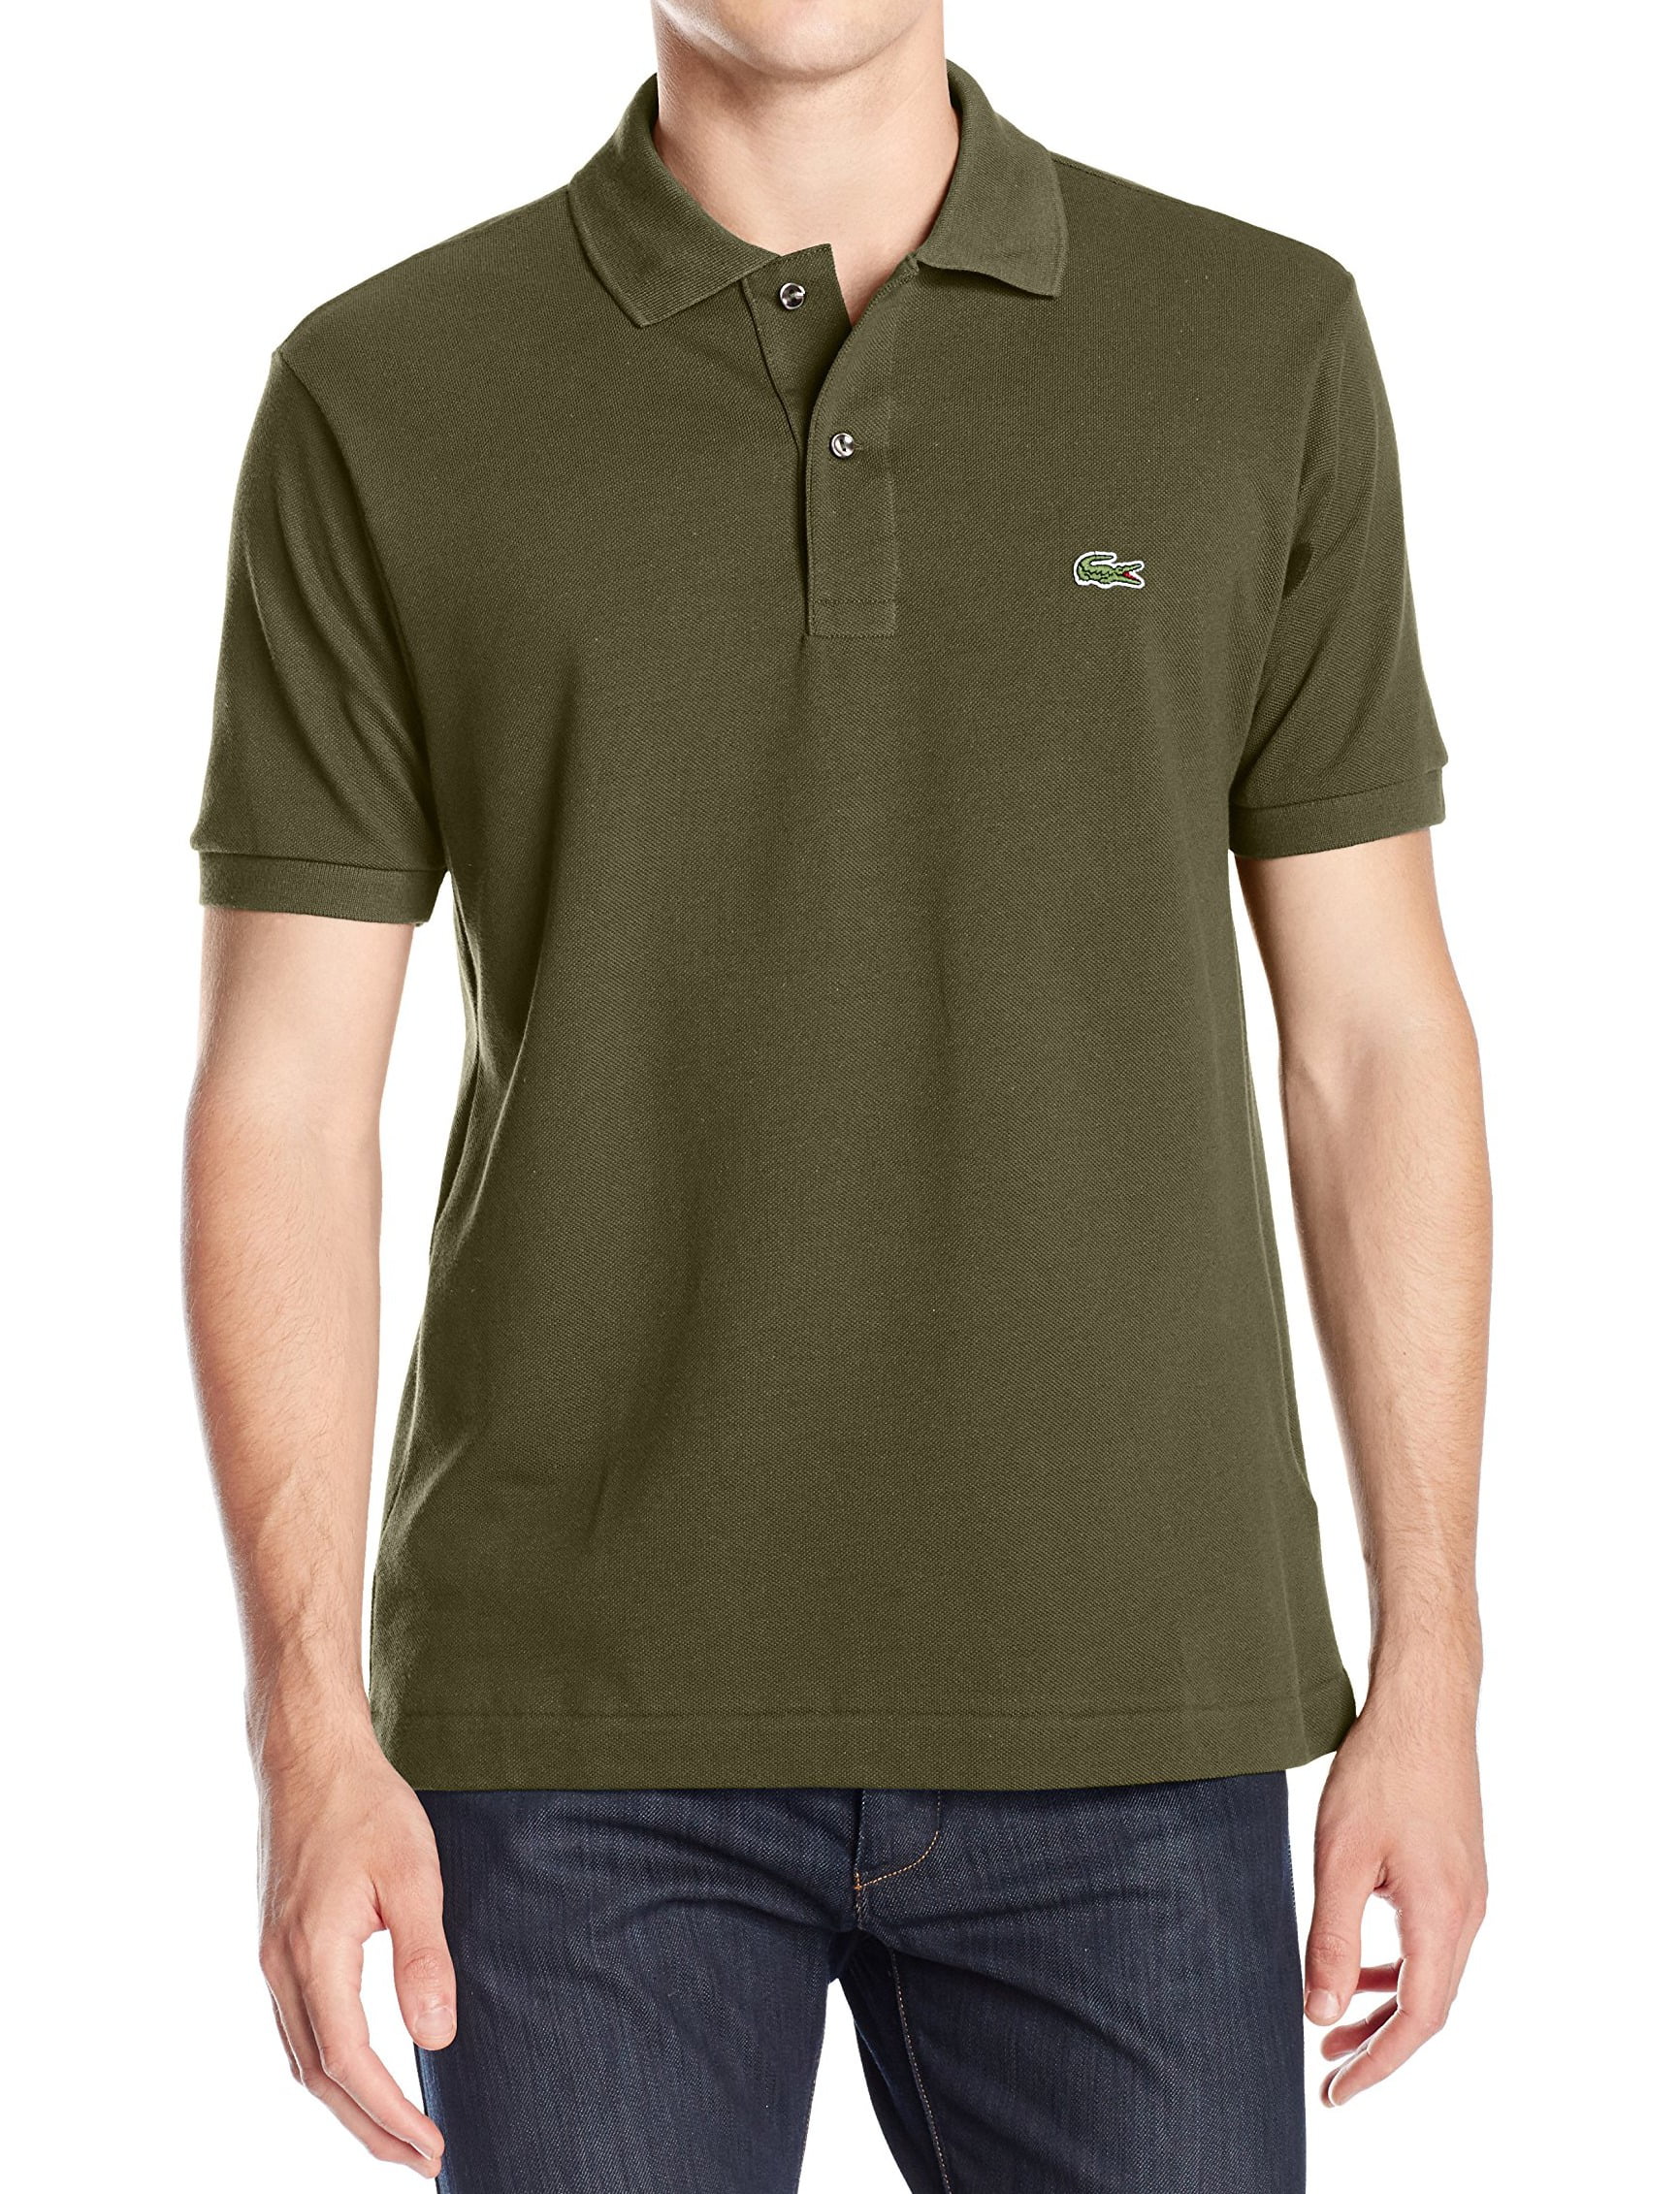 lacoste olive green polo